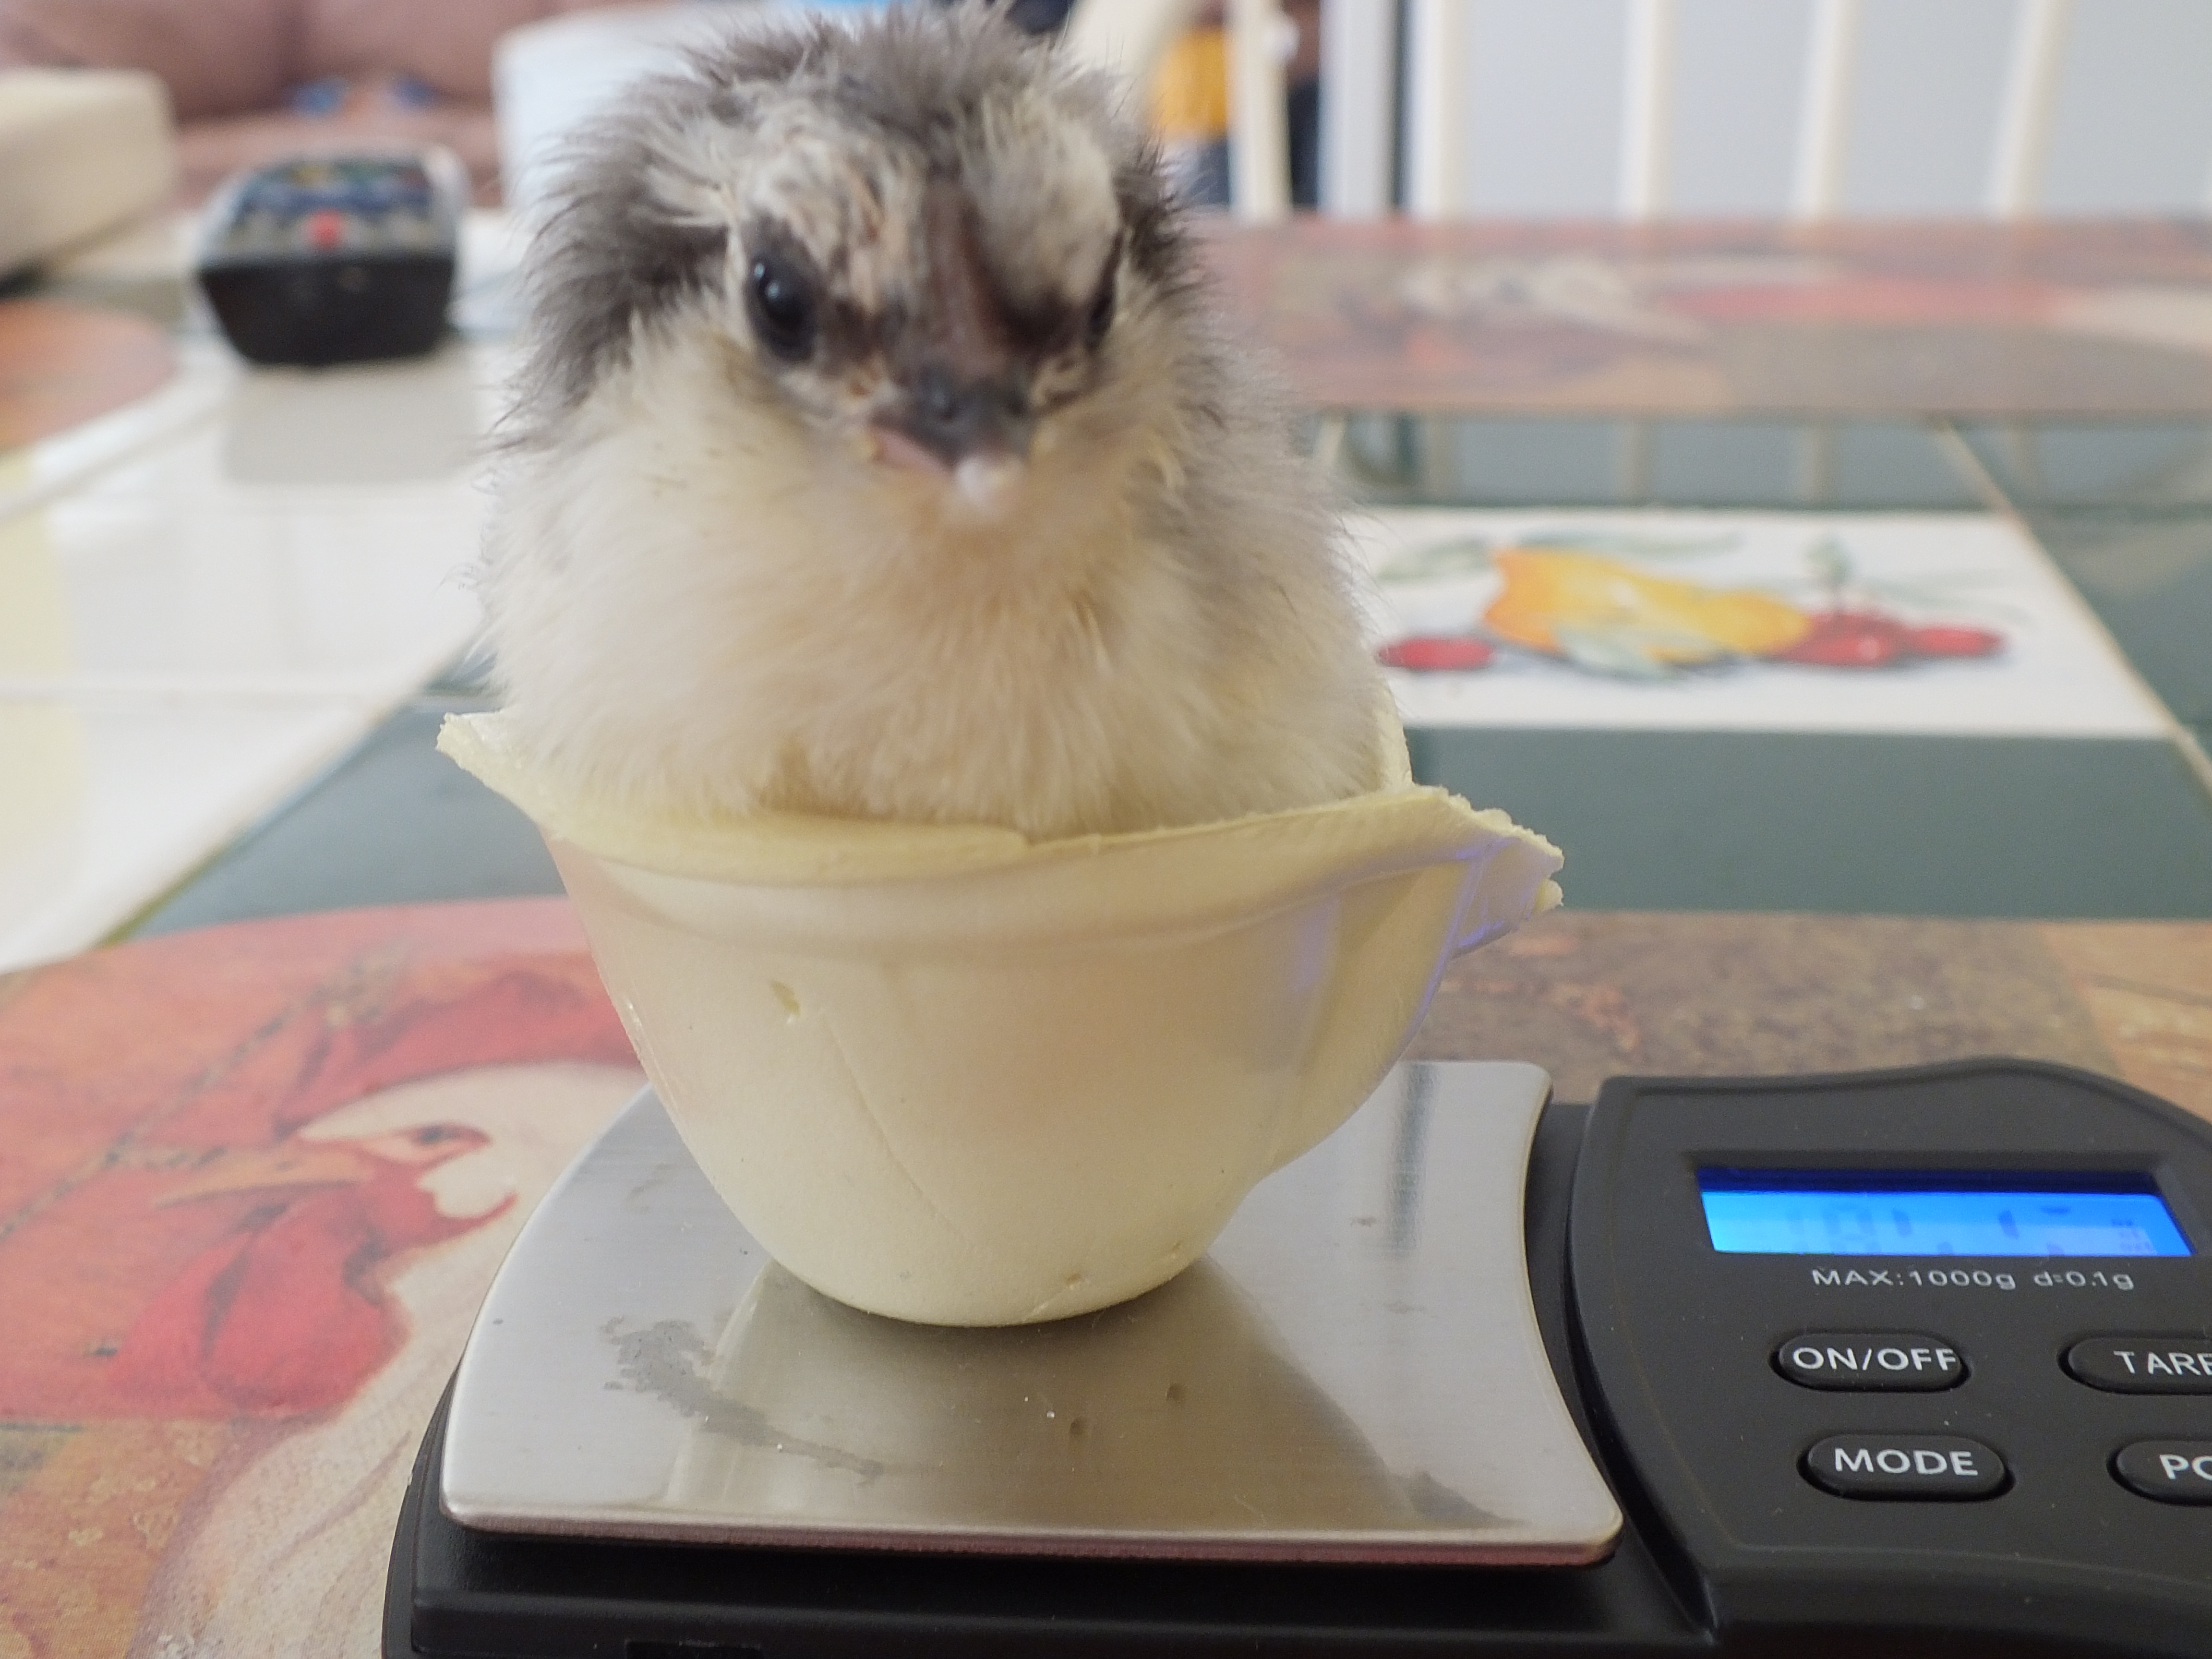 Meet my smallest chick ever. Her name is April. She is an EE and was hatched 2 days ago with my help. She has gained weight and weighs 26 grams! She is a feisty little thing too. Thinks she is as big as her siblings. Too cute.